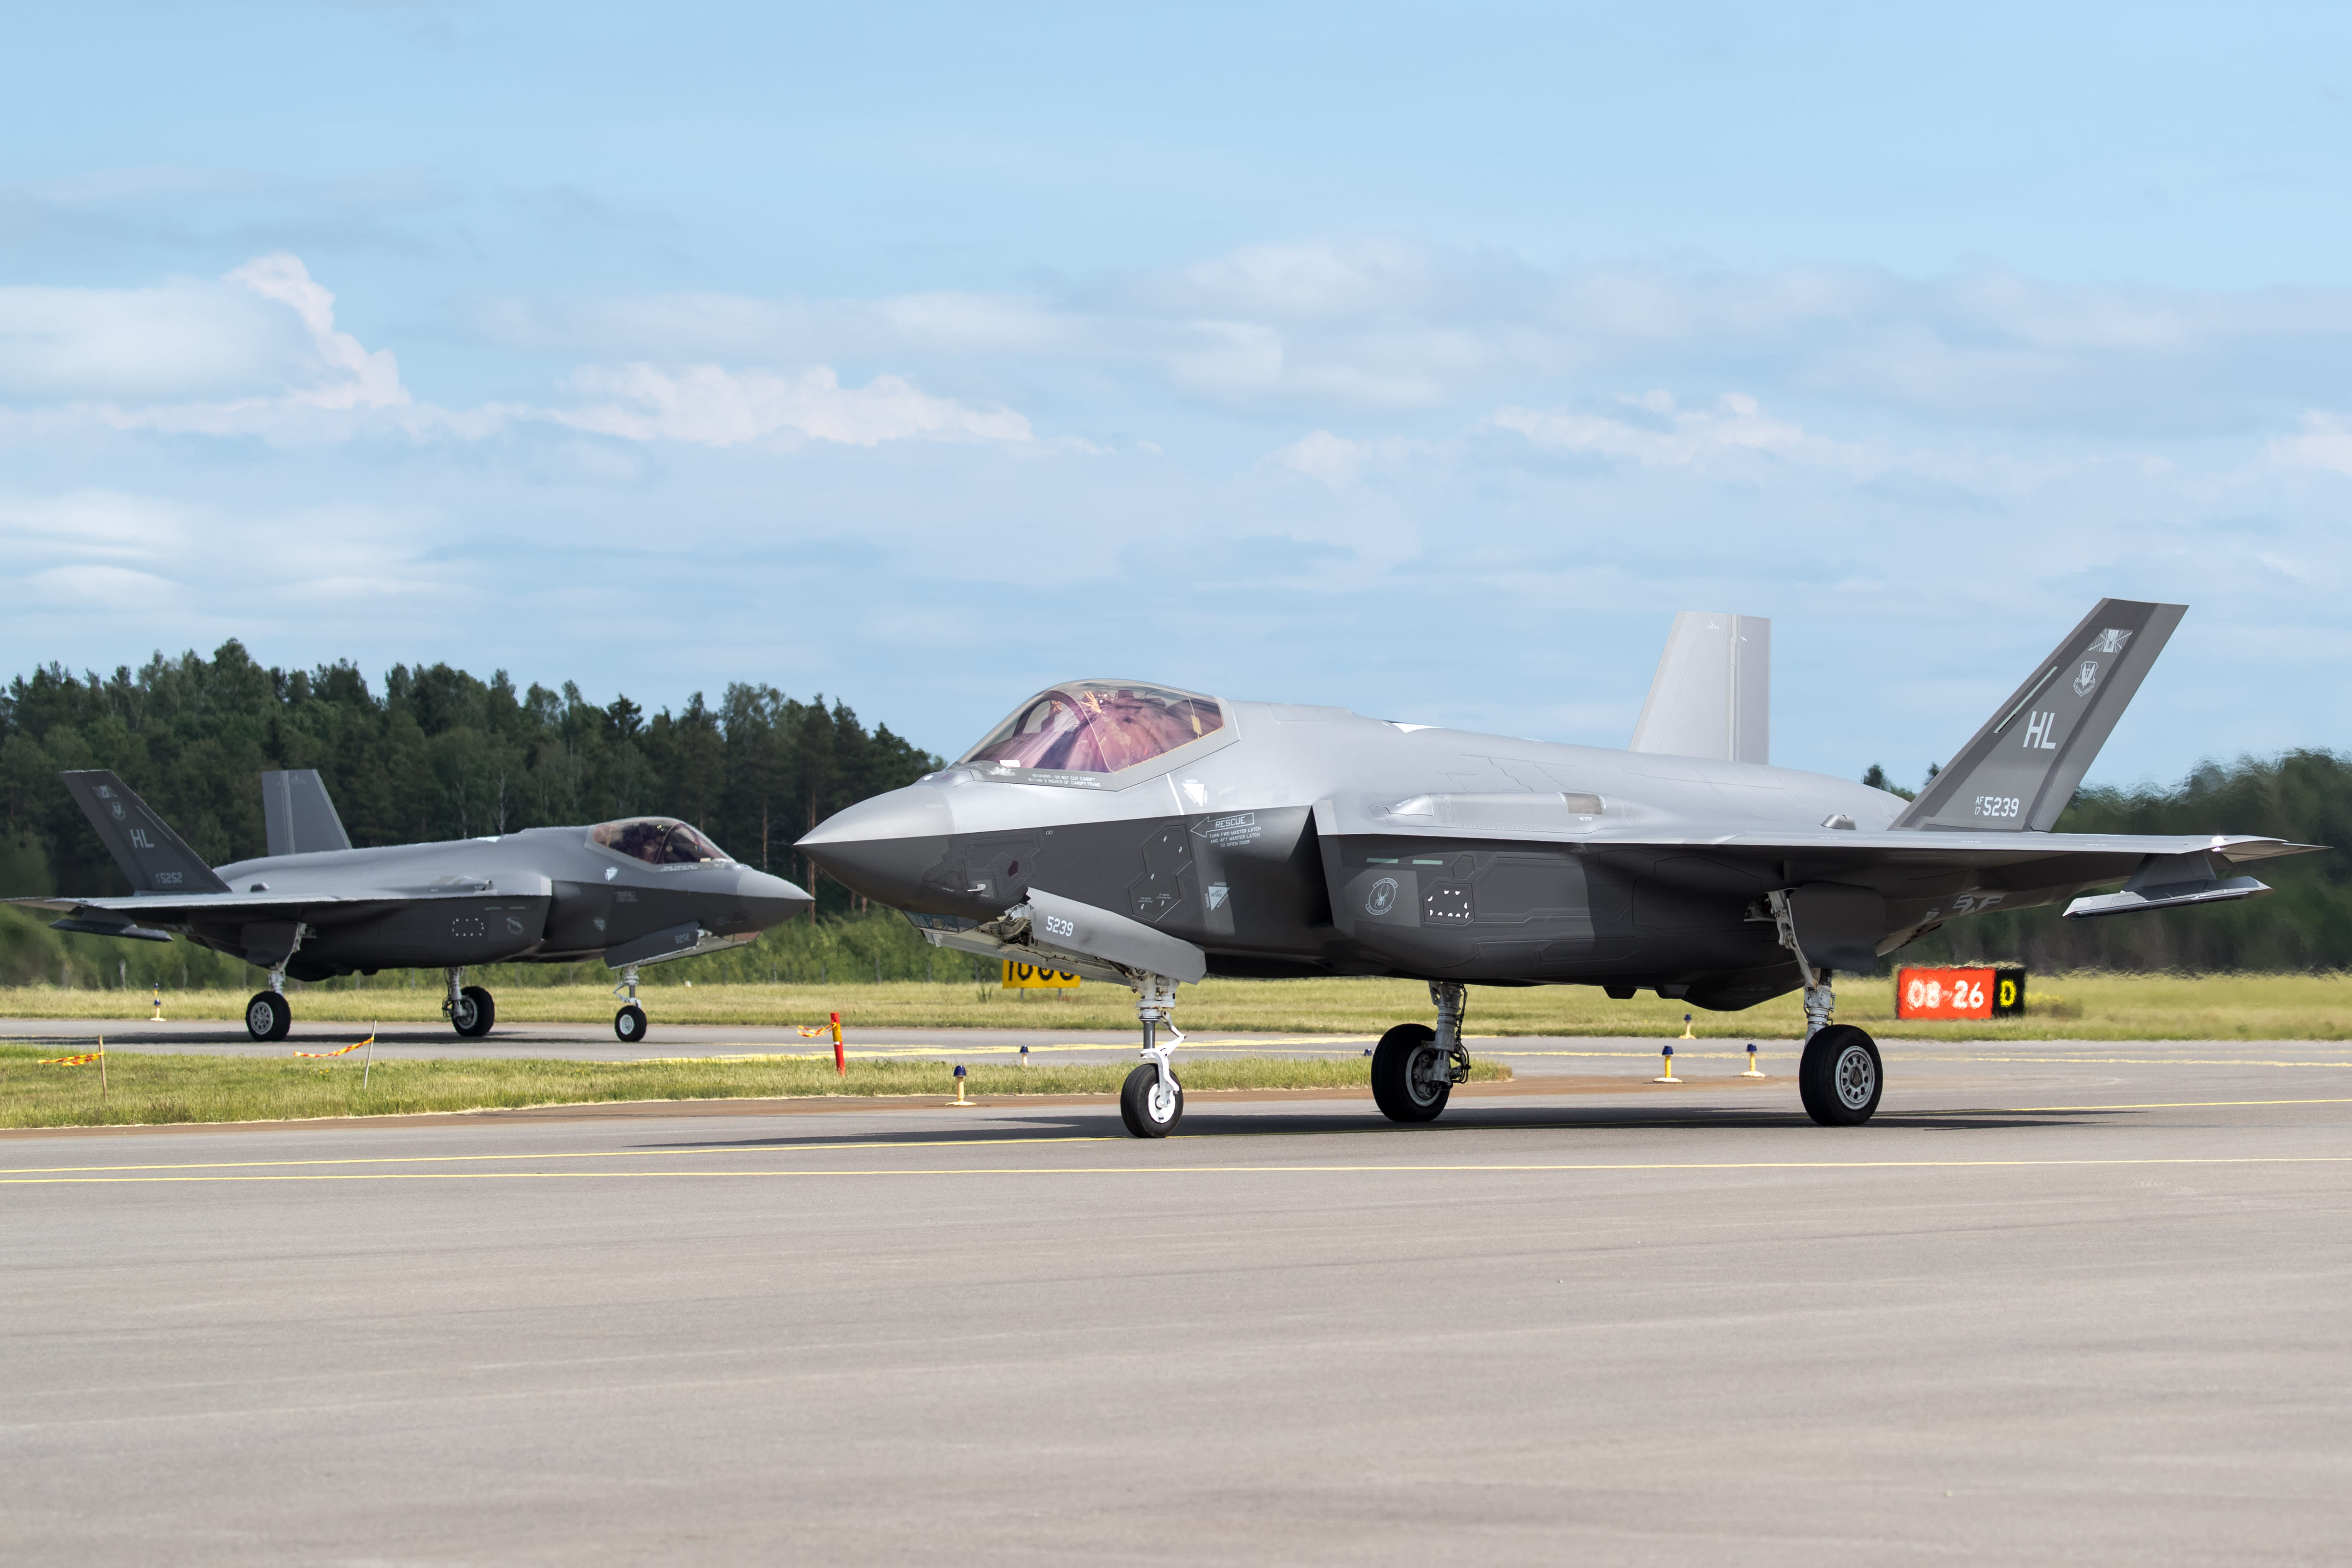 Preparations for the F-35 fighter assembly near Tampere are progressing